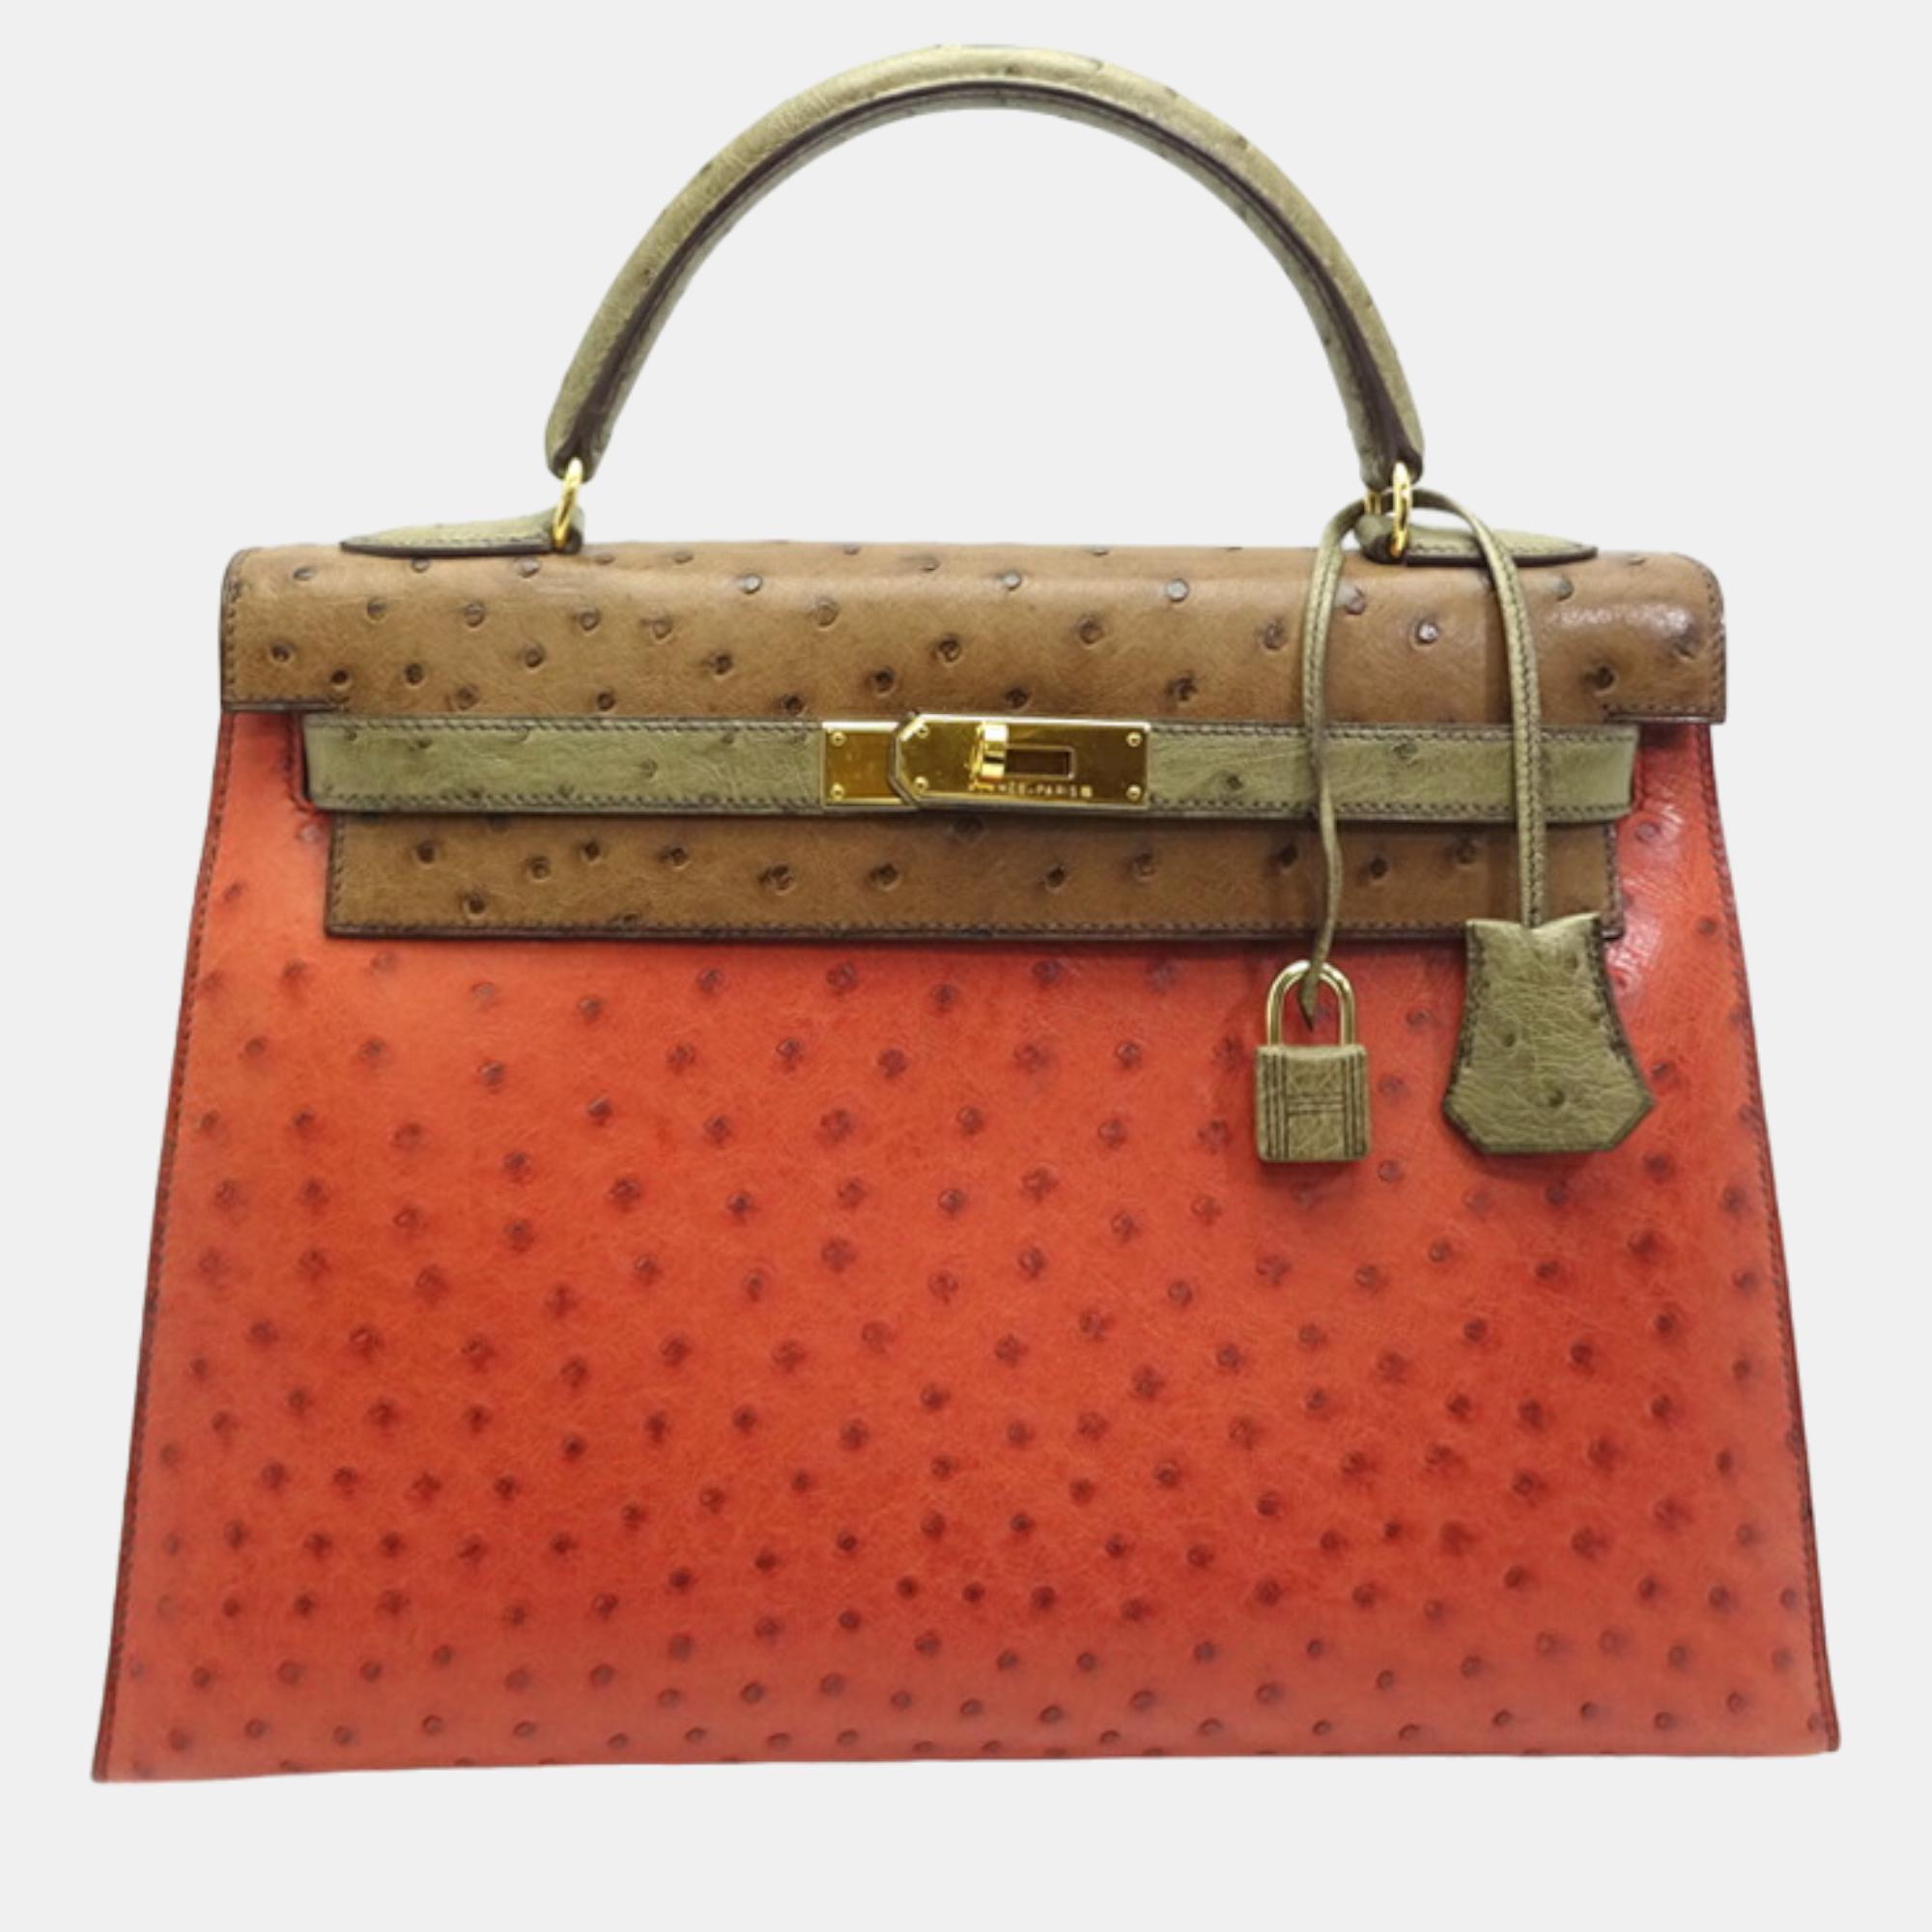 Hermes red ostrich leather kelly sellier 32 handbag